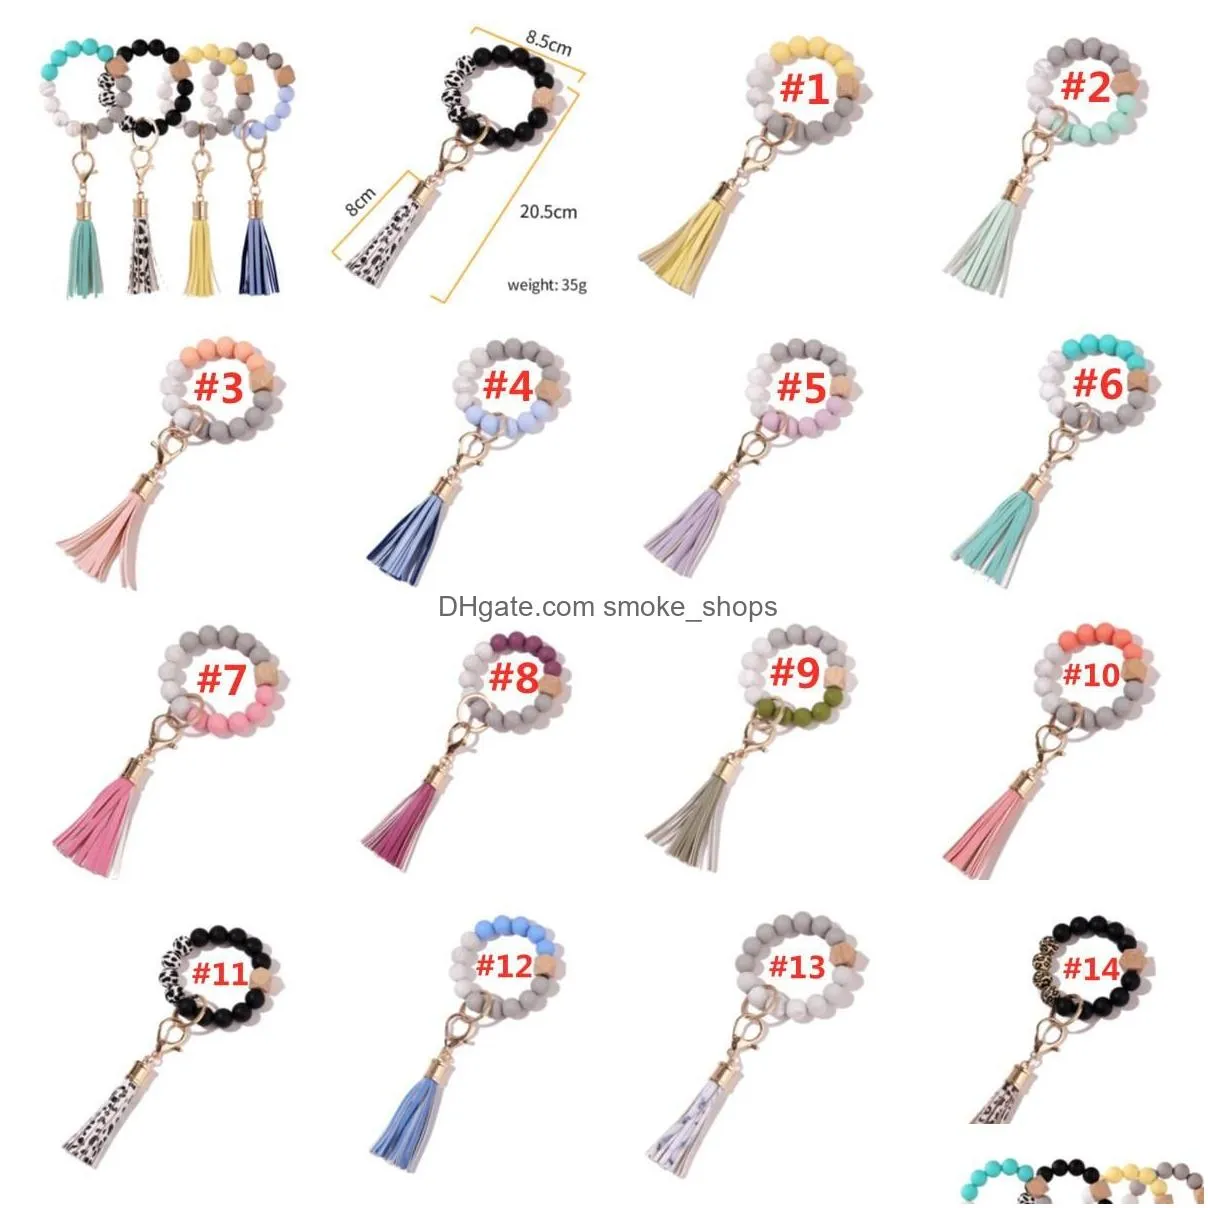 party favor party silicone wooden beads keychain suede tassel bracelet keyring anti-lost bangle key ring for home wood beaded crafts car decoration pendant